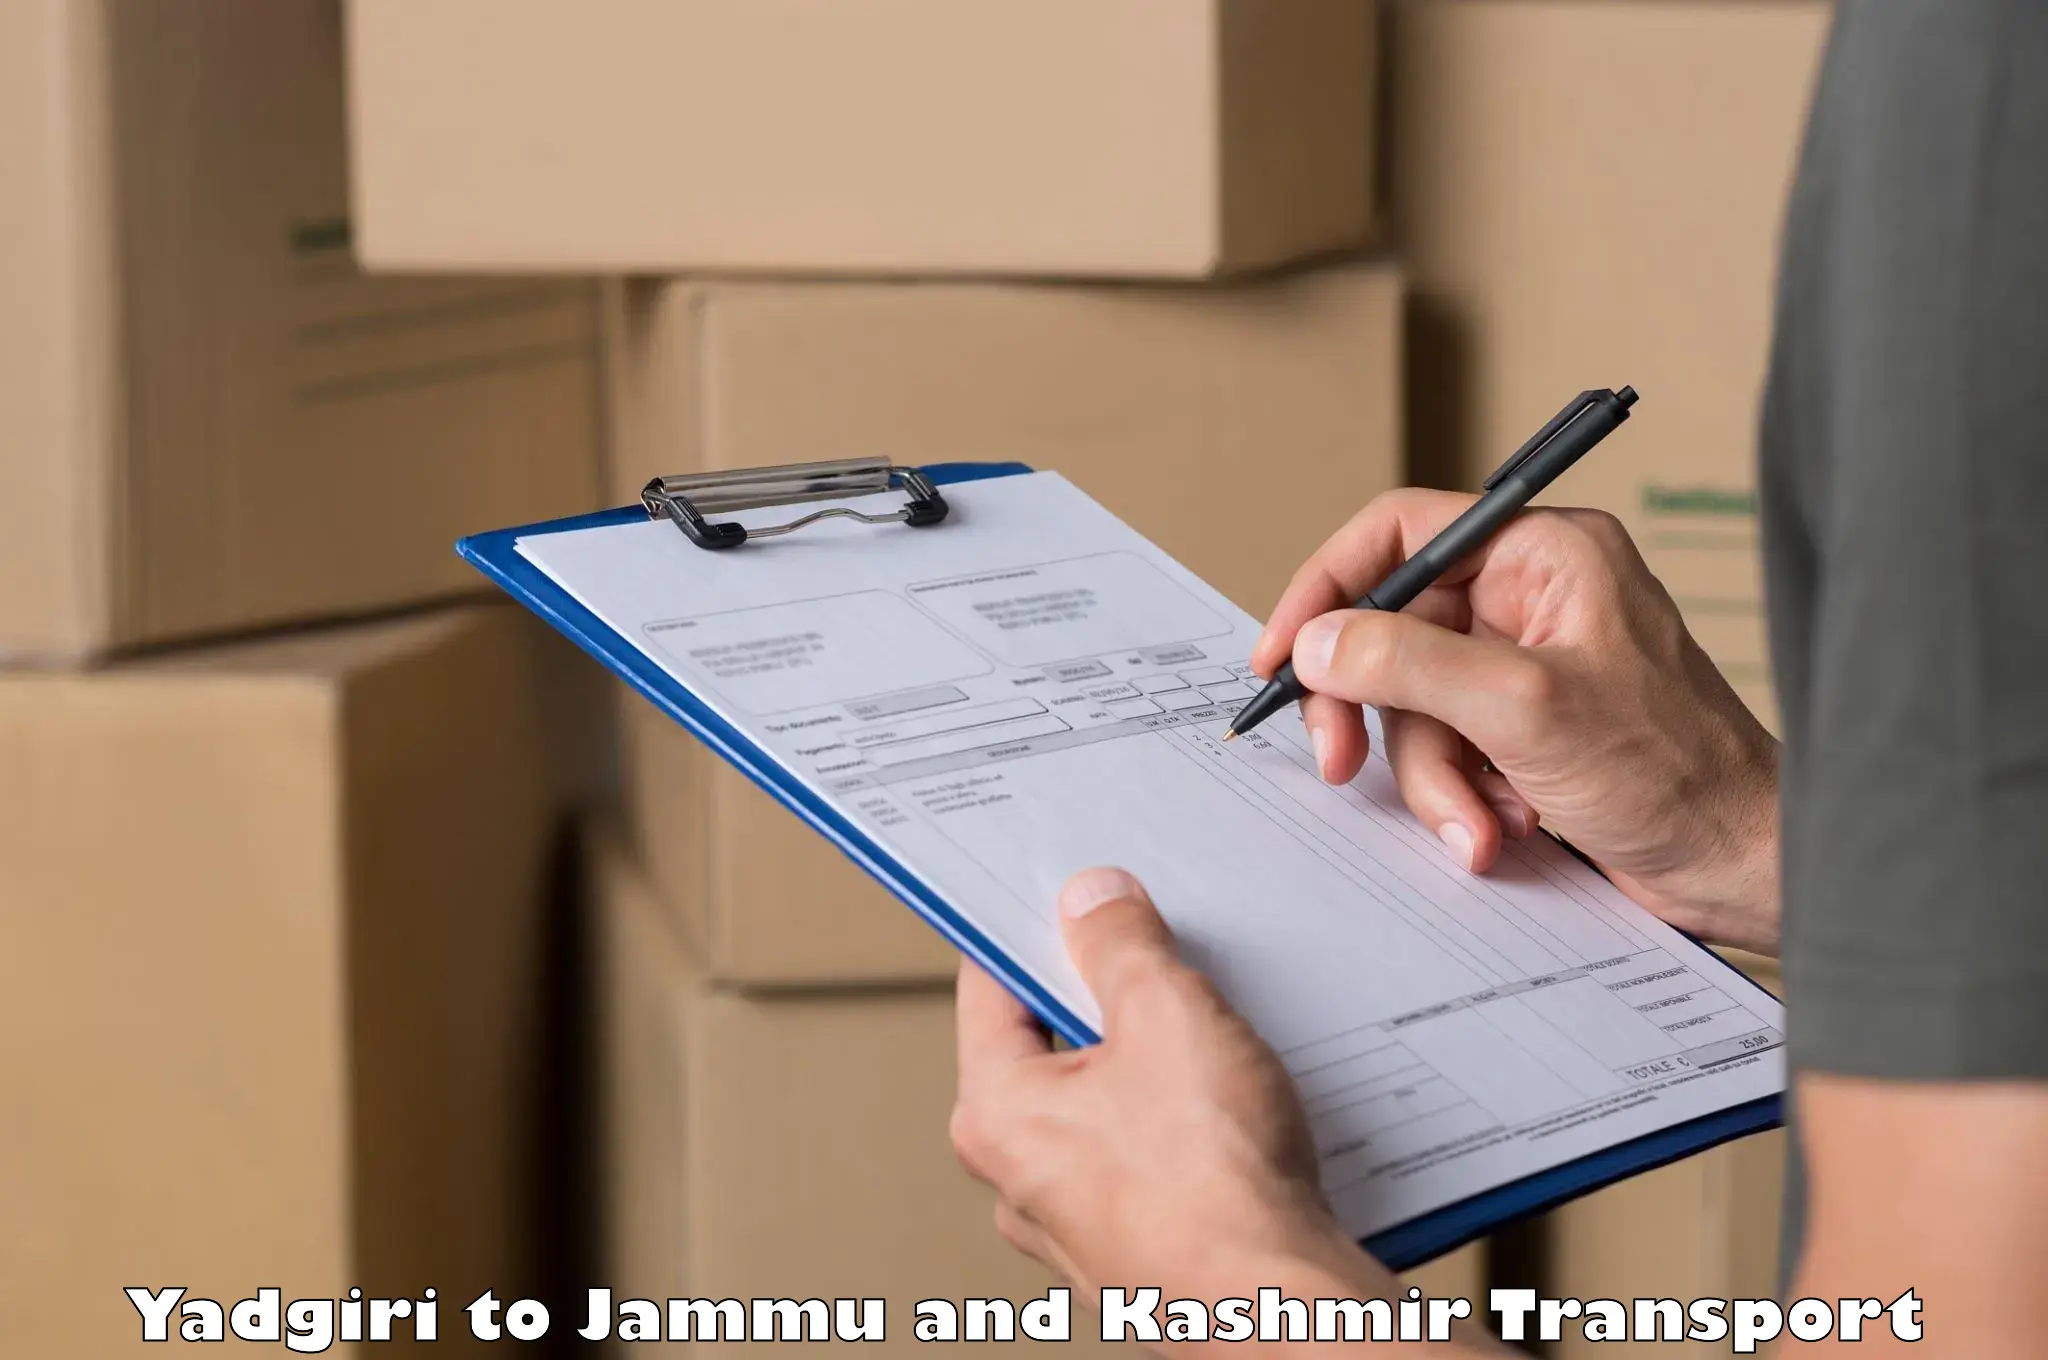 Vehicle transport services in Yadgiri to Jammu and Kashmir